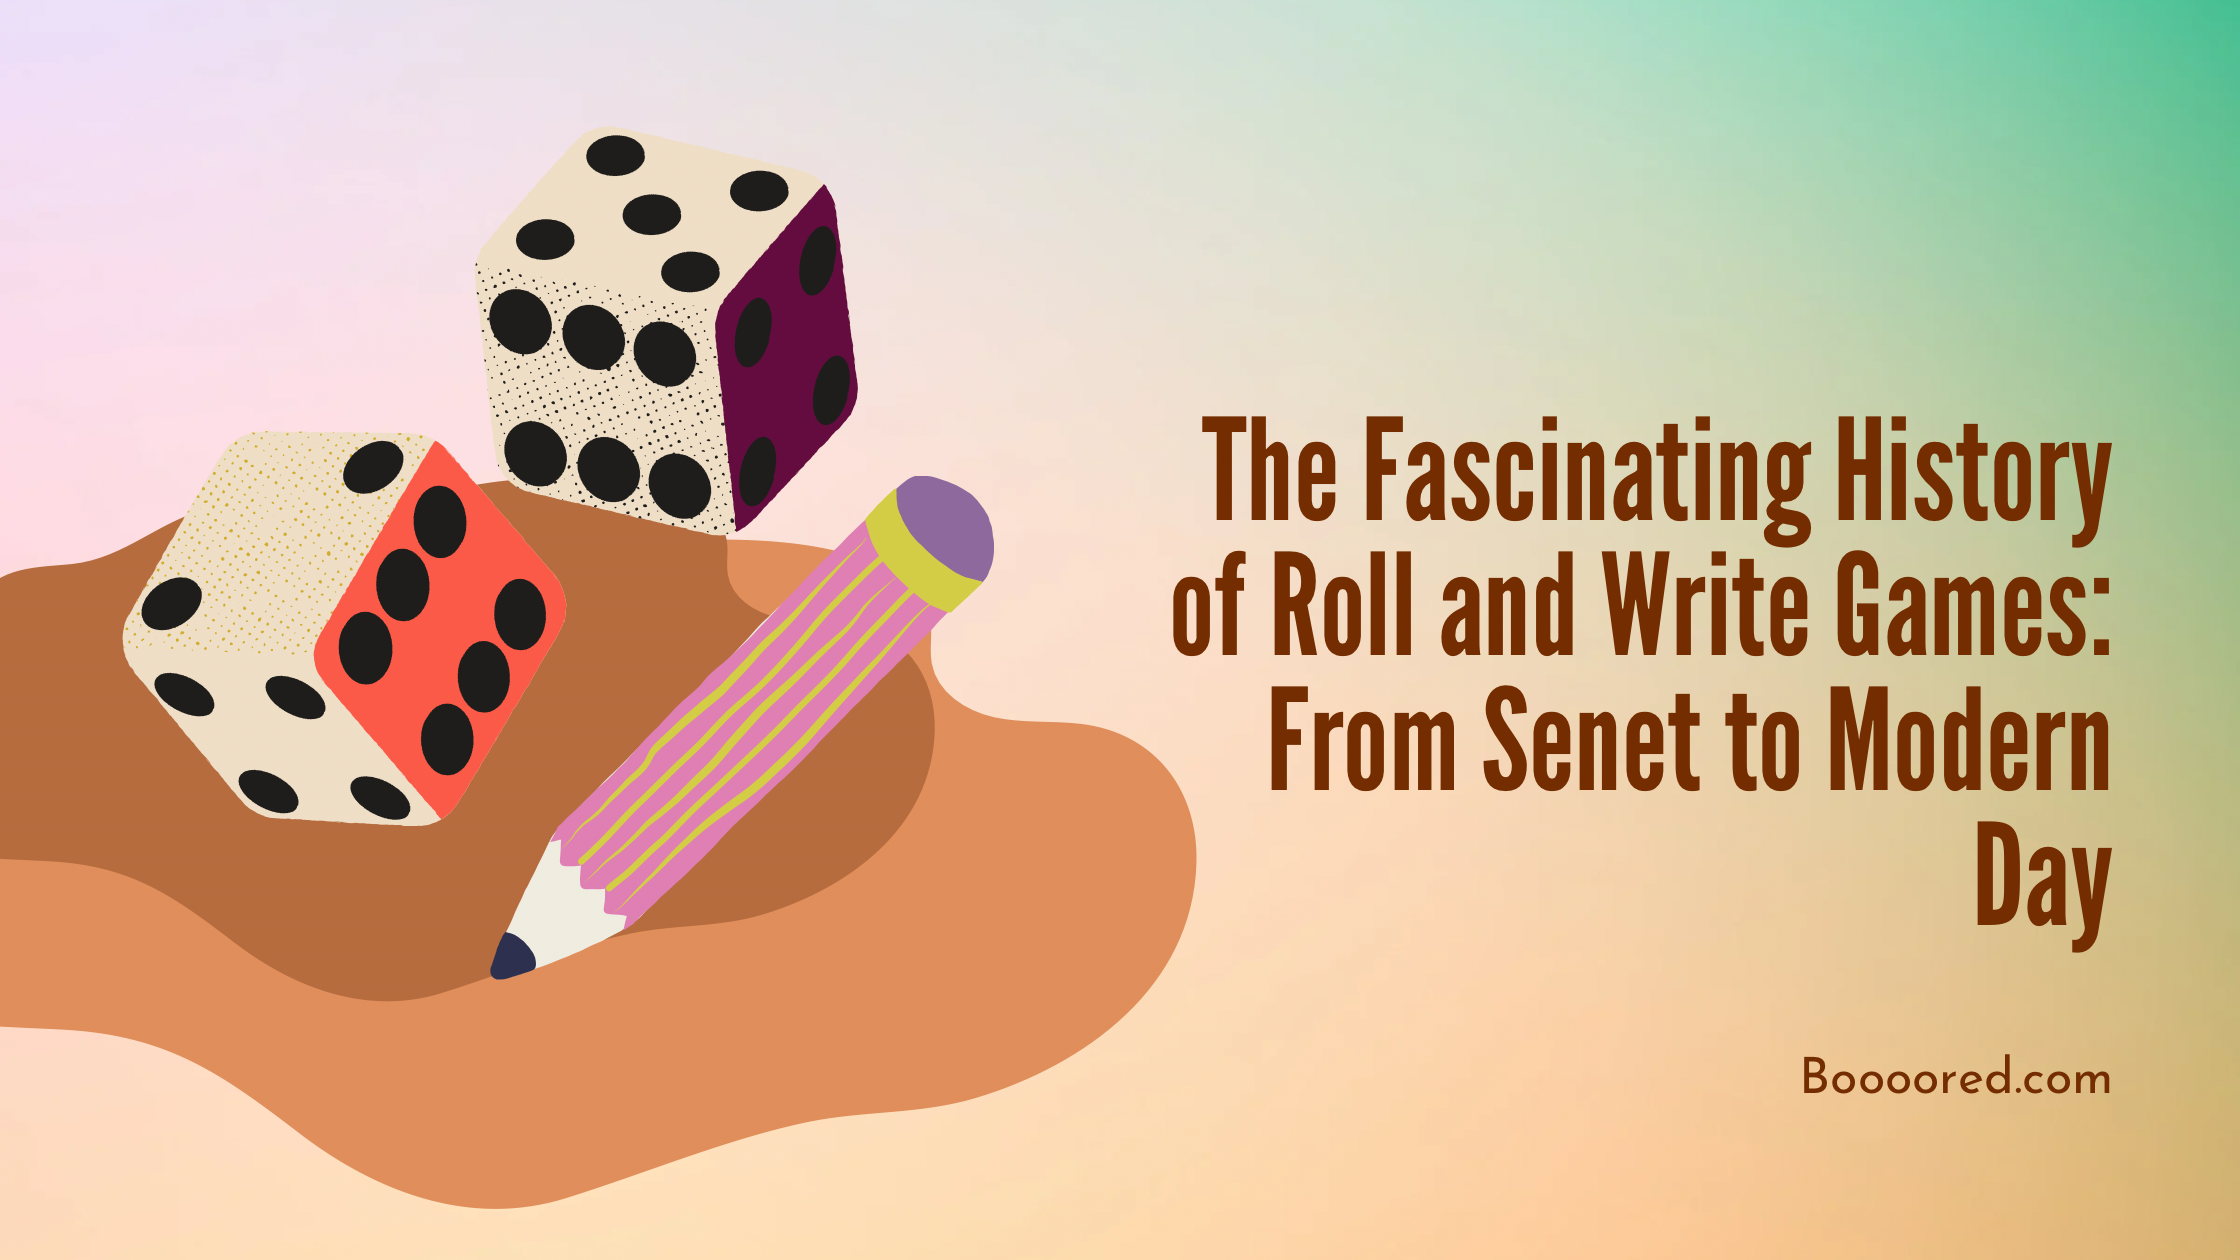 The Fascinating History of Roll and Write Games: From Senet to Modern Day